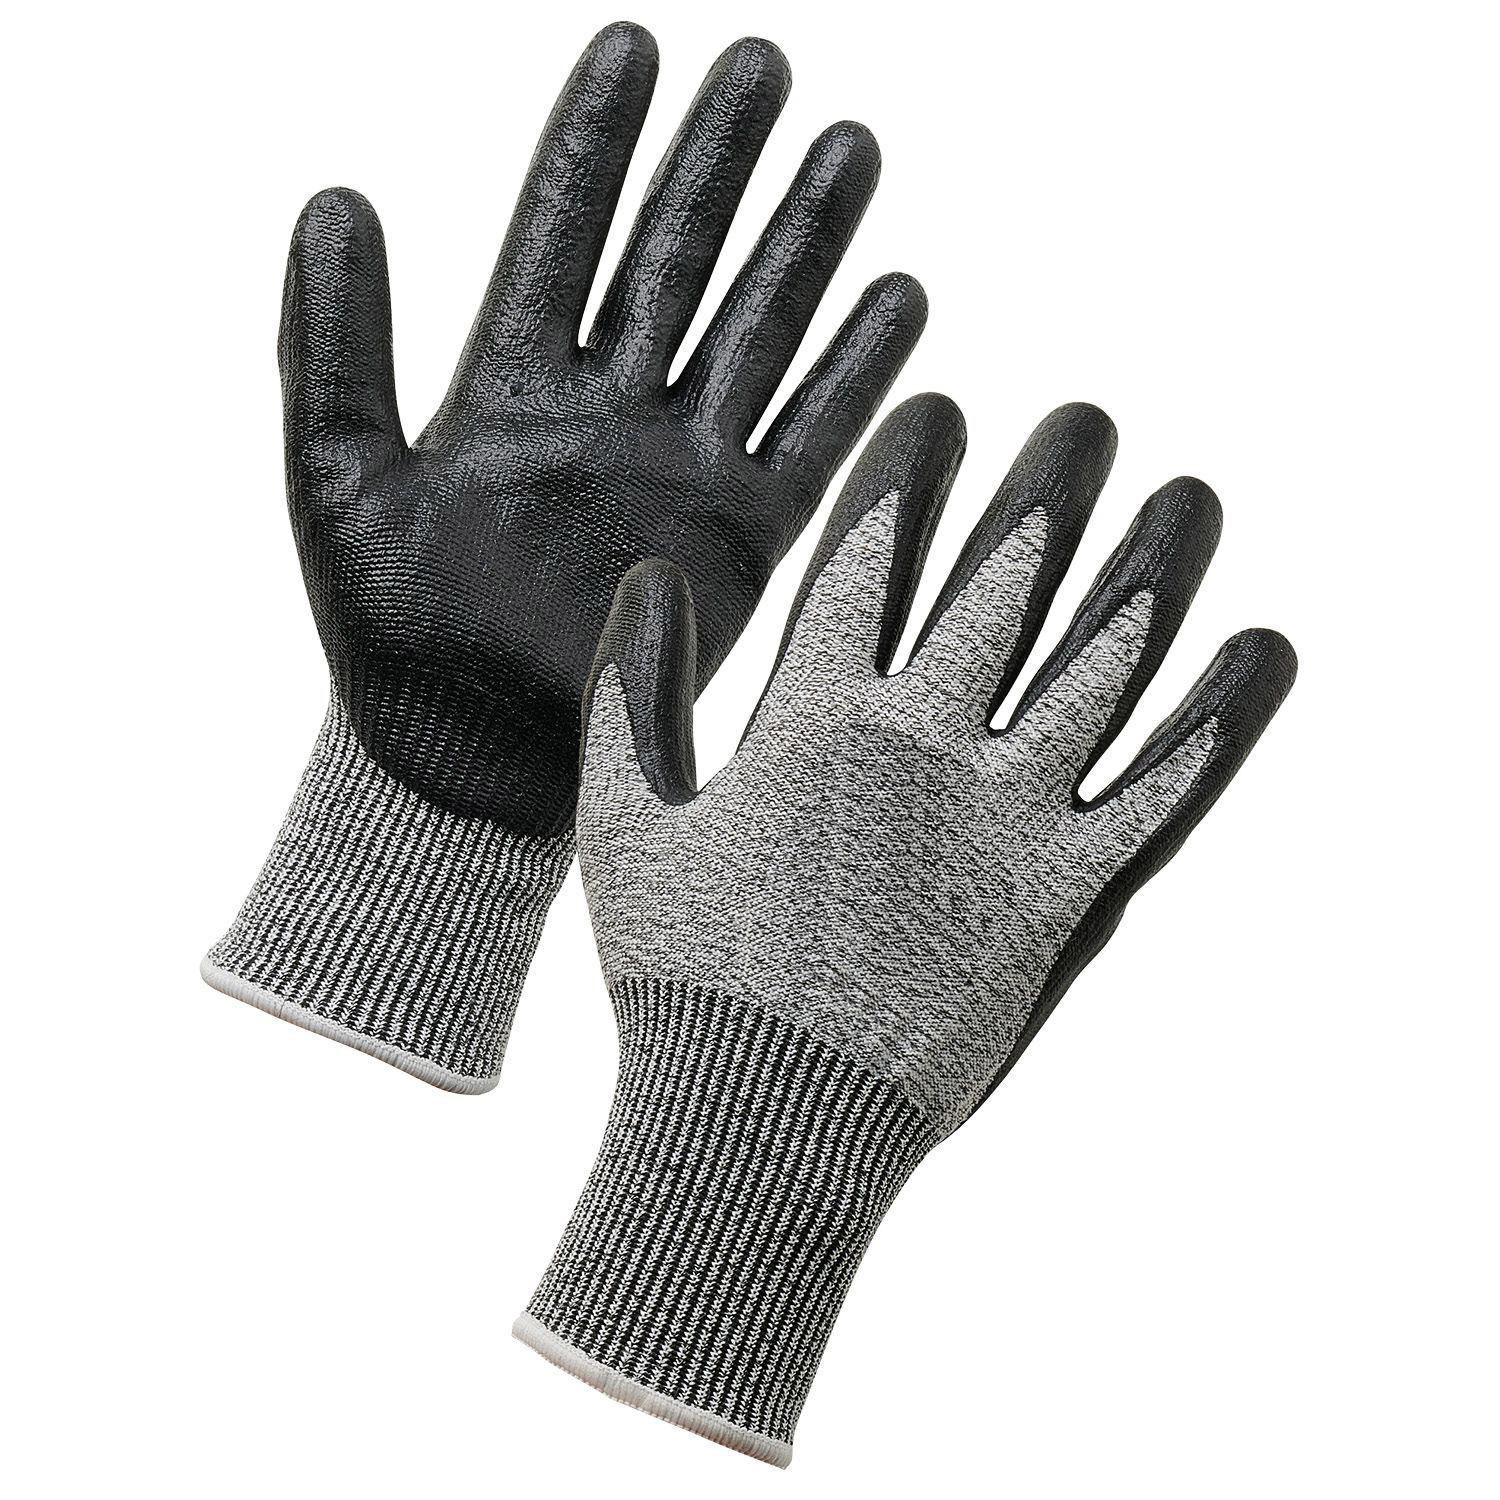 ISO Cut Level D Cut Resistant Gloves with HPPE Steel Fibre